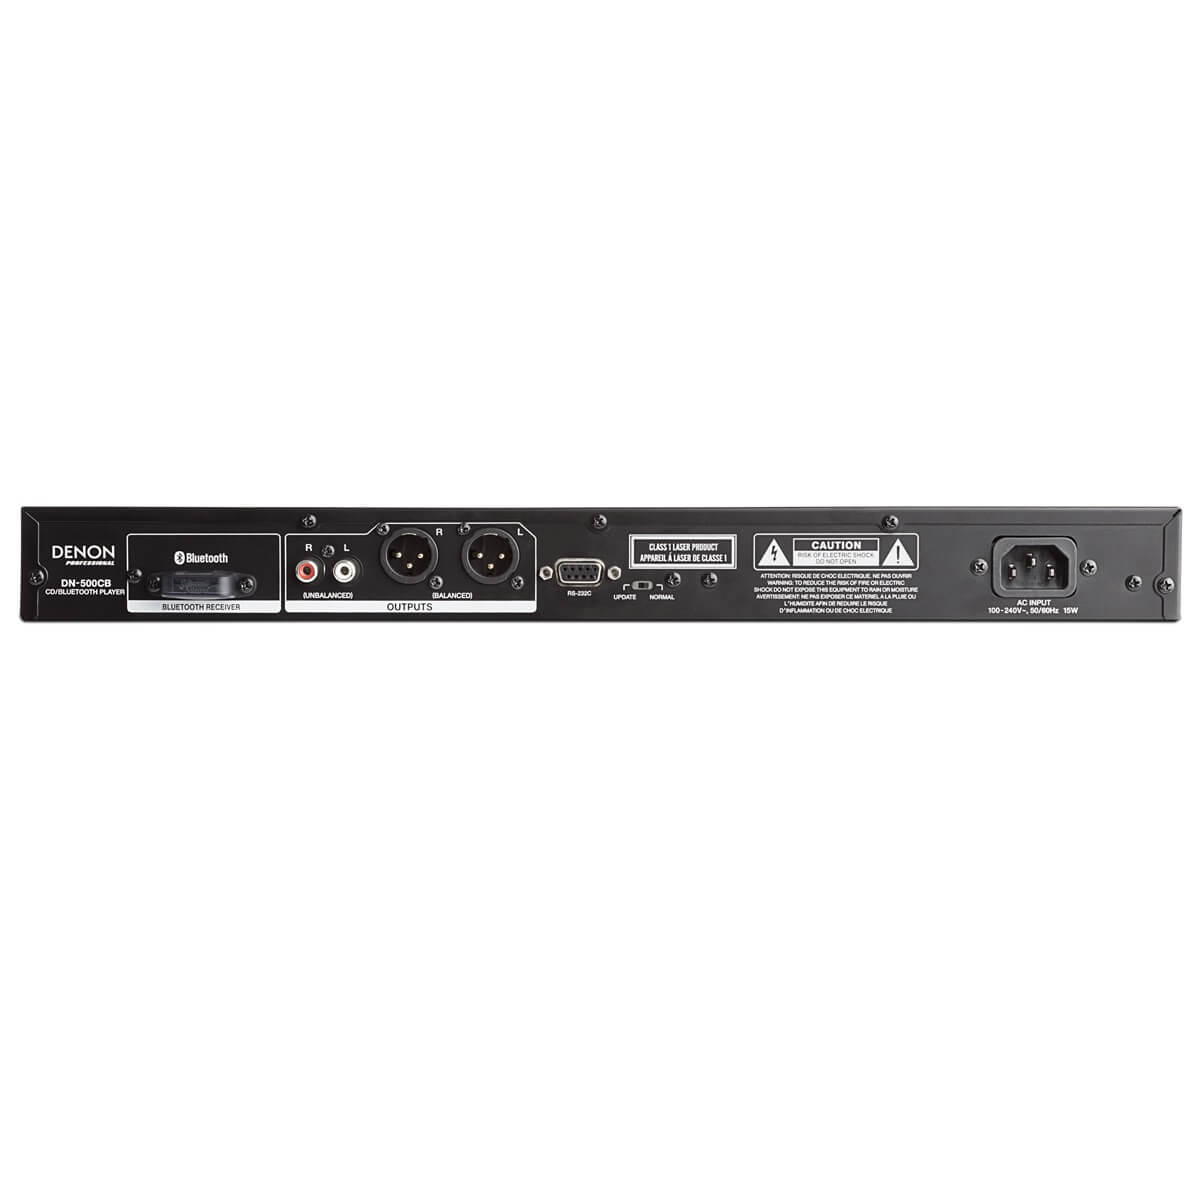 Denon DN-500CB CD Player with Bluetooth, USB and AUX inputs, rear